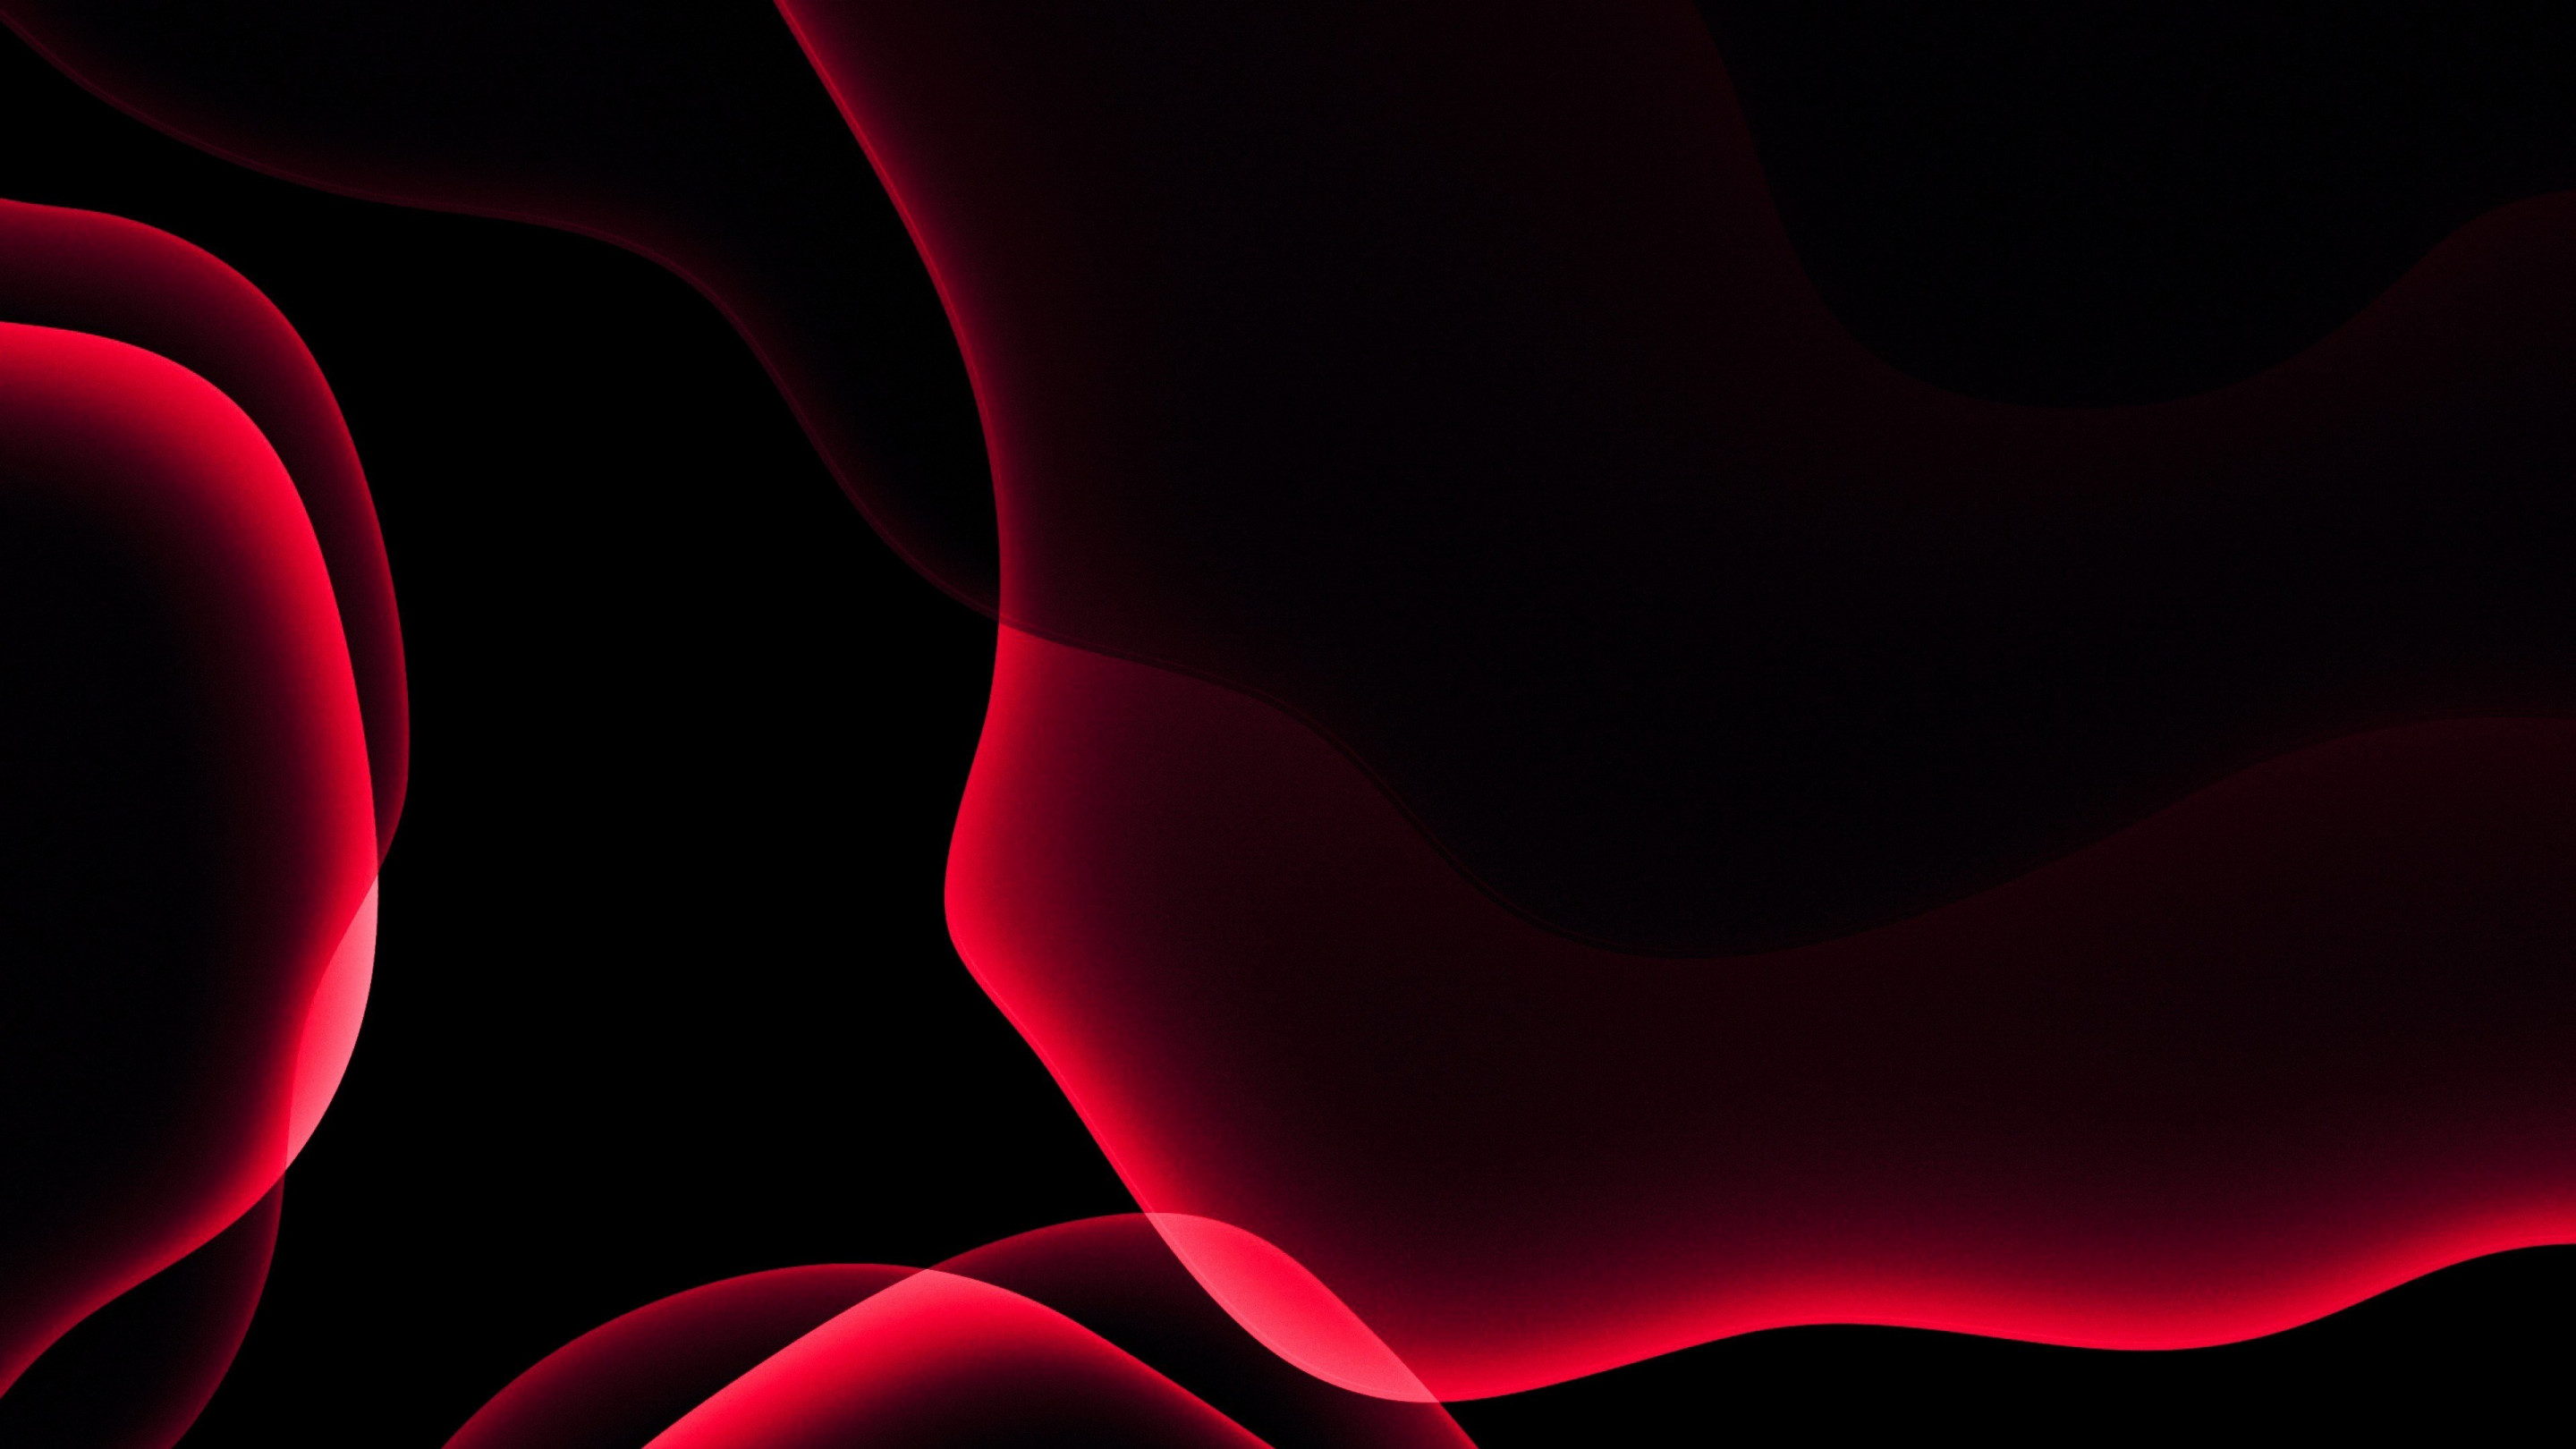 iOS 13 red abstract wallpaper 2880x1620